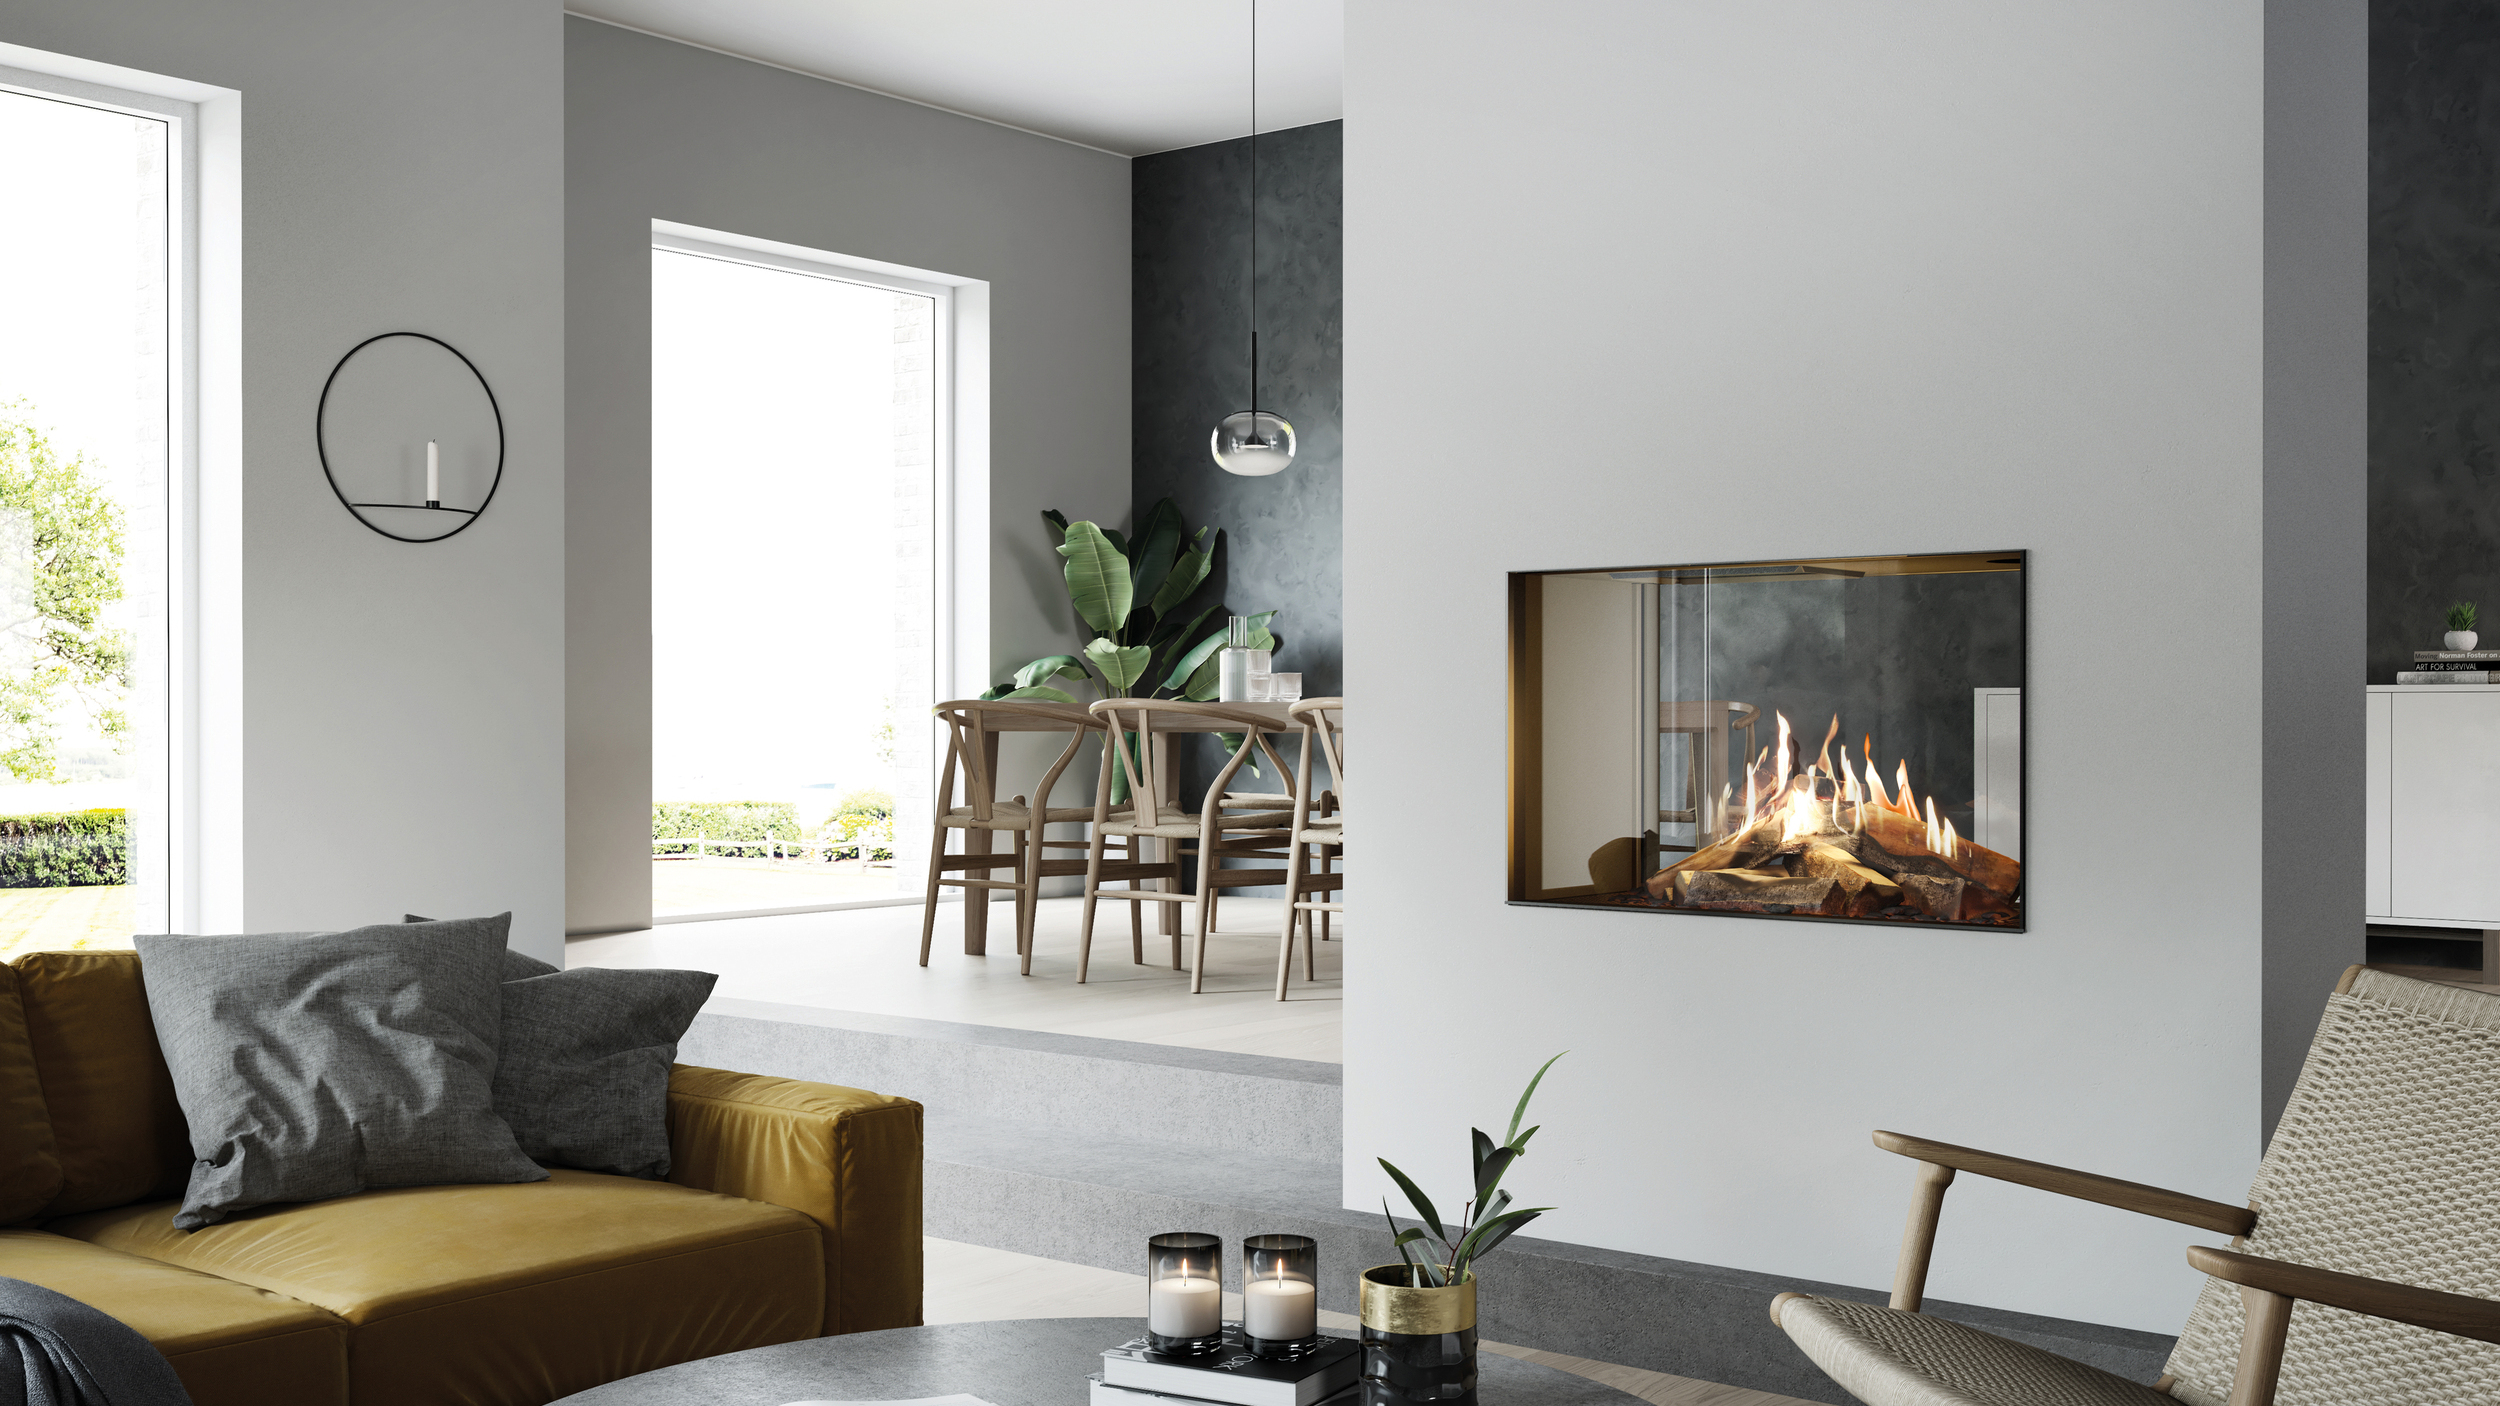 VISIO 90 T gas fireplace is located in the centre of the brightly furnished room, yet still provides a tunnel-like view from the living room to the dining room and kitchen